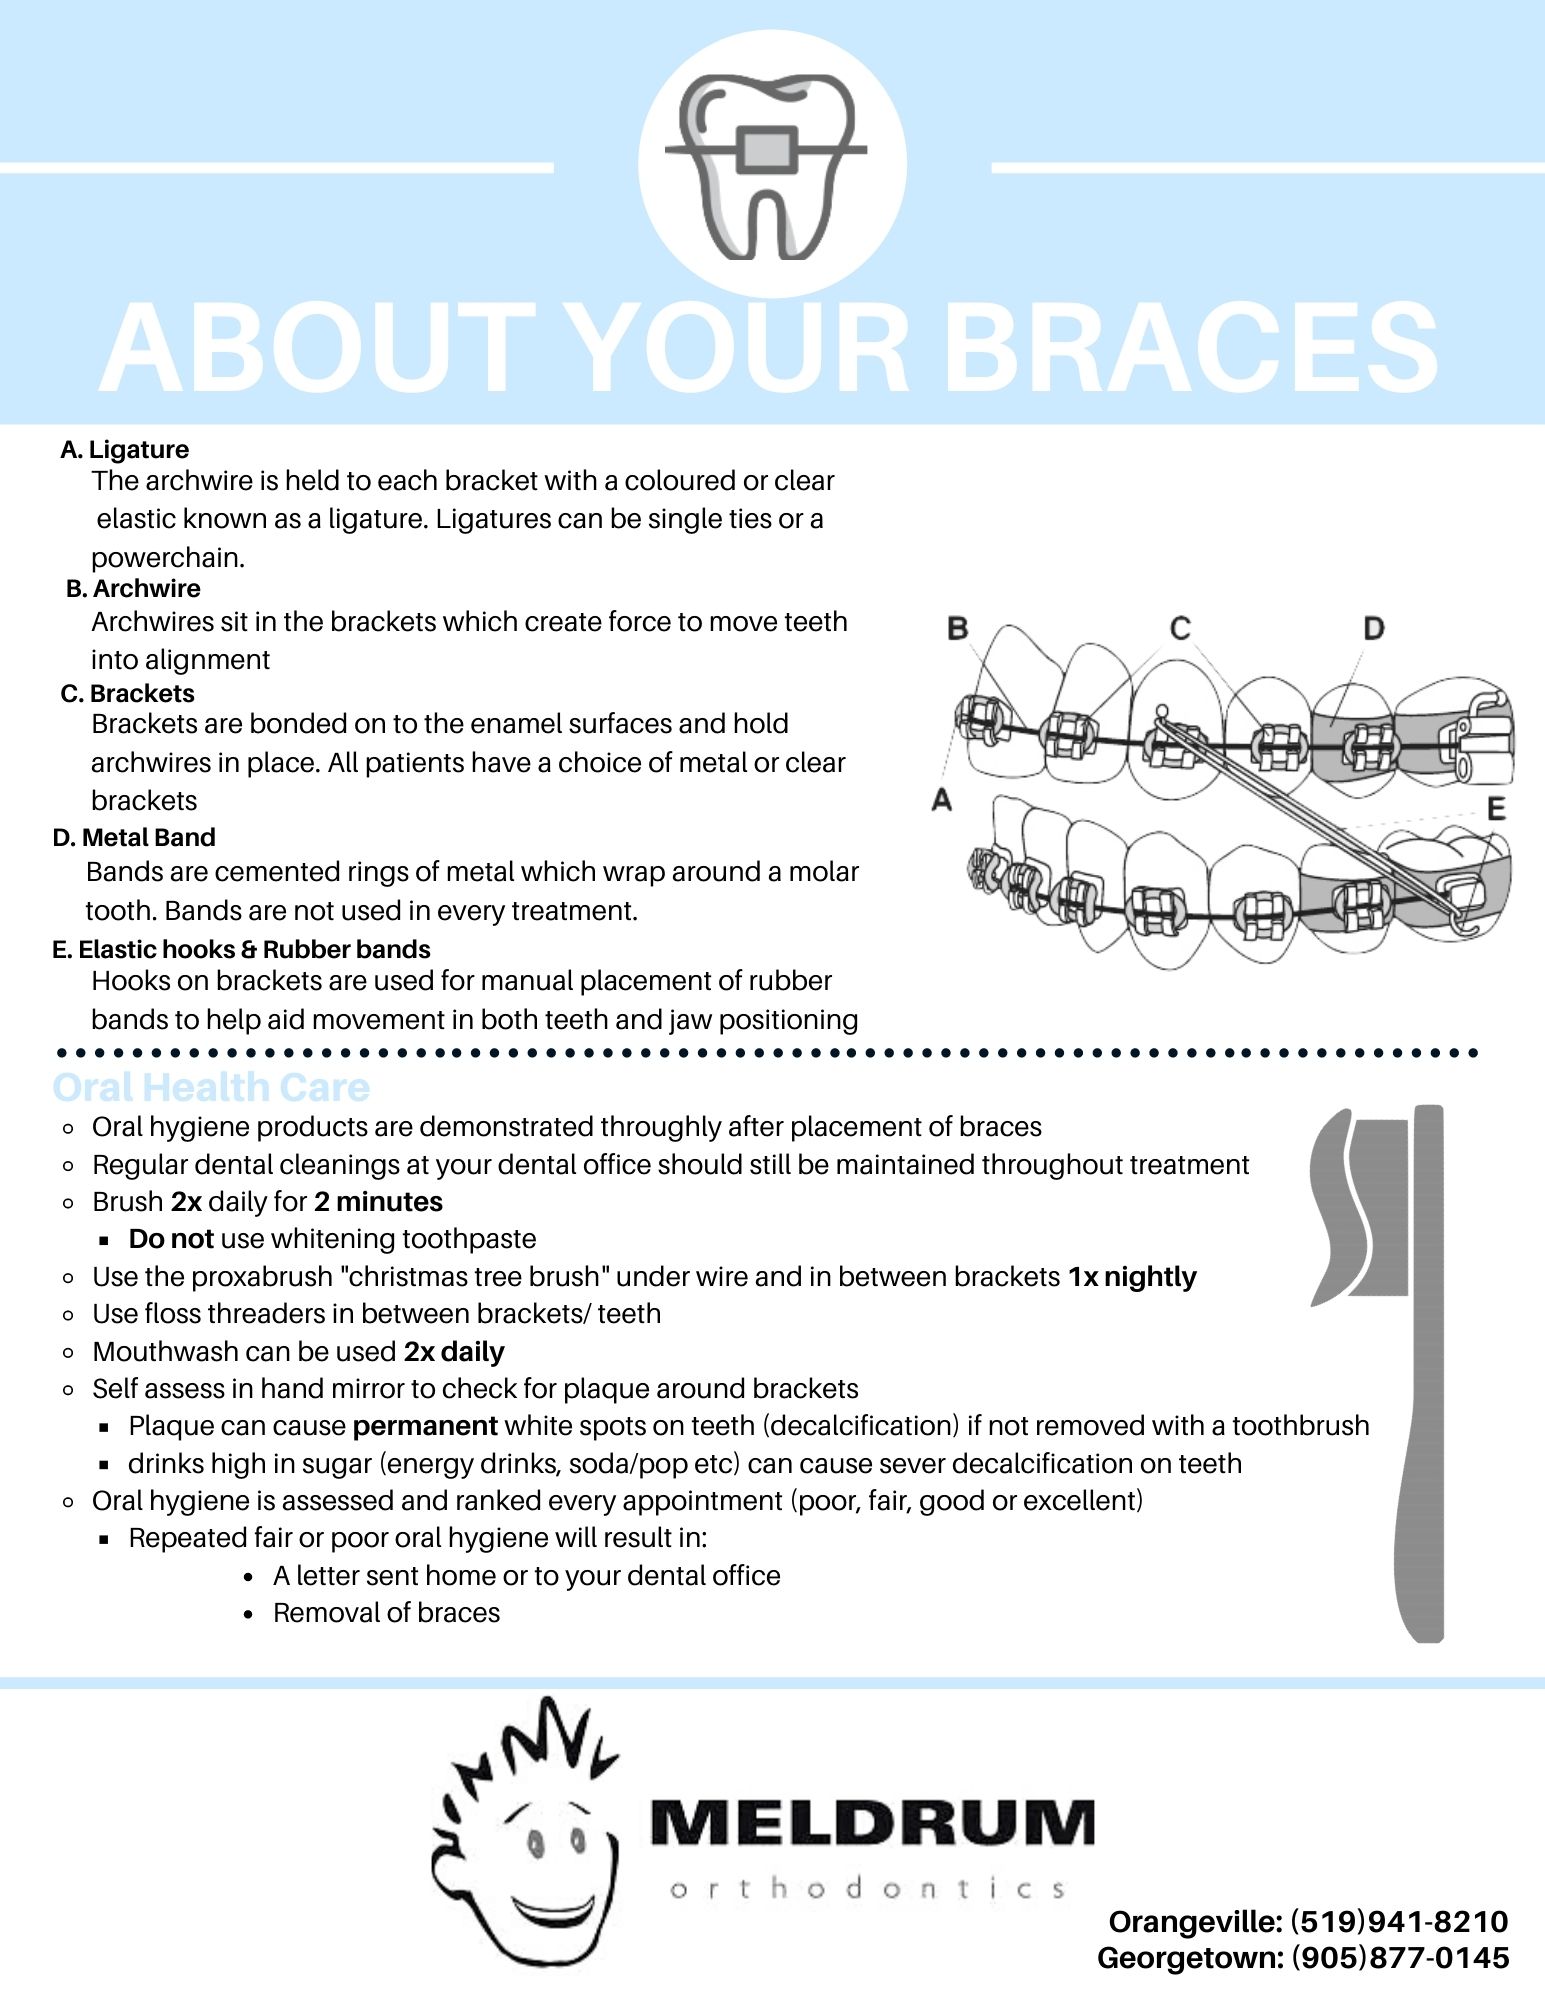 About your Braces